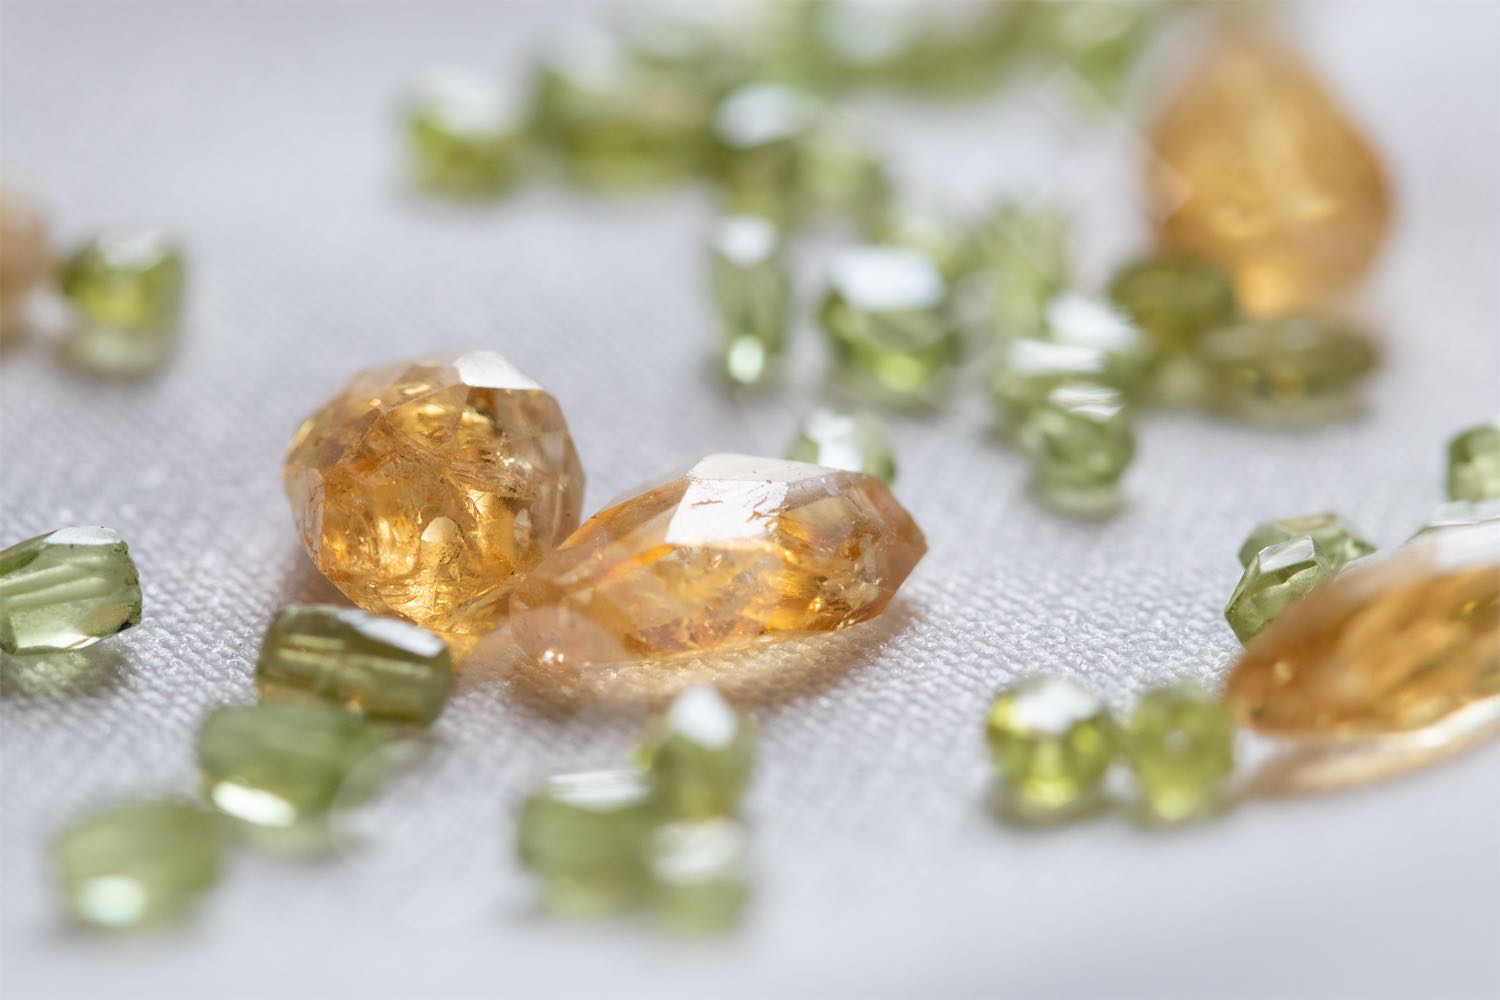 From Calm to Courage: How Gemstones Boost your Well-Being